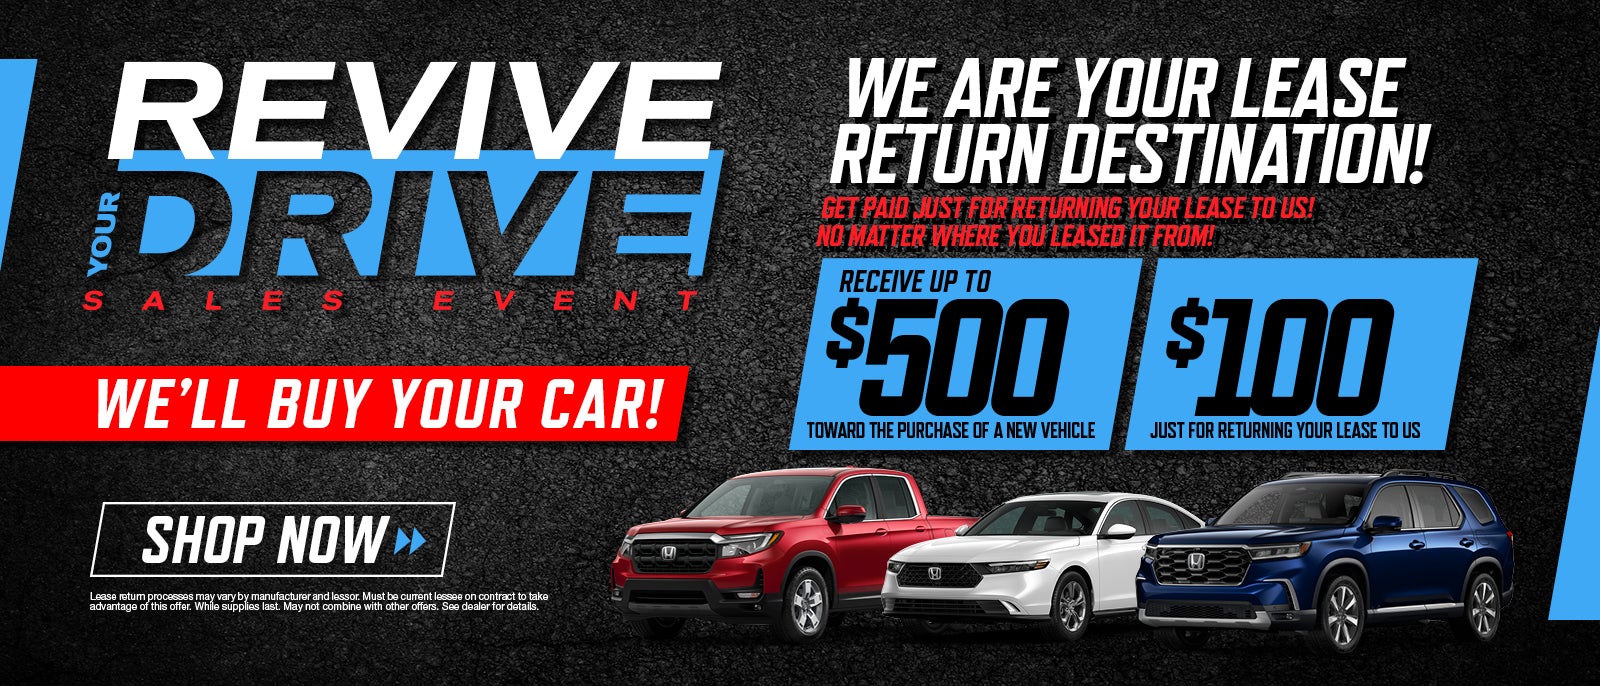 Receive up to $500 toward the purchase of a new vehicle